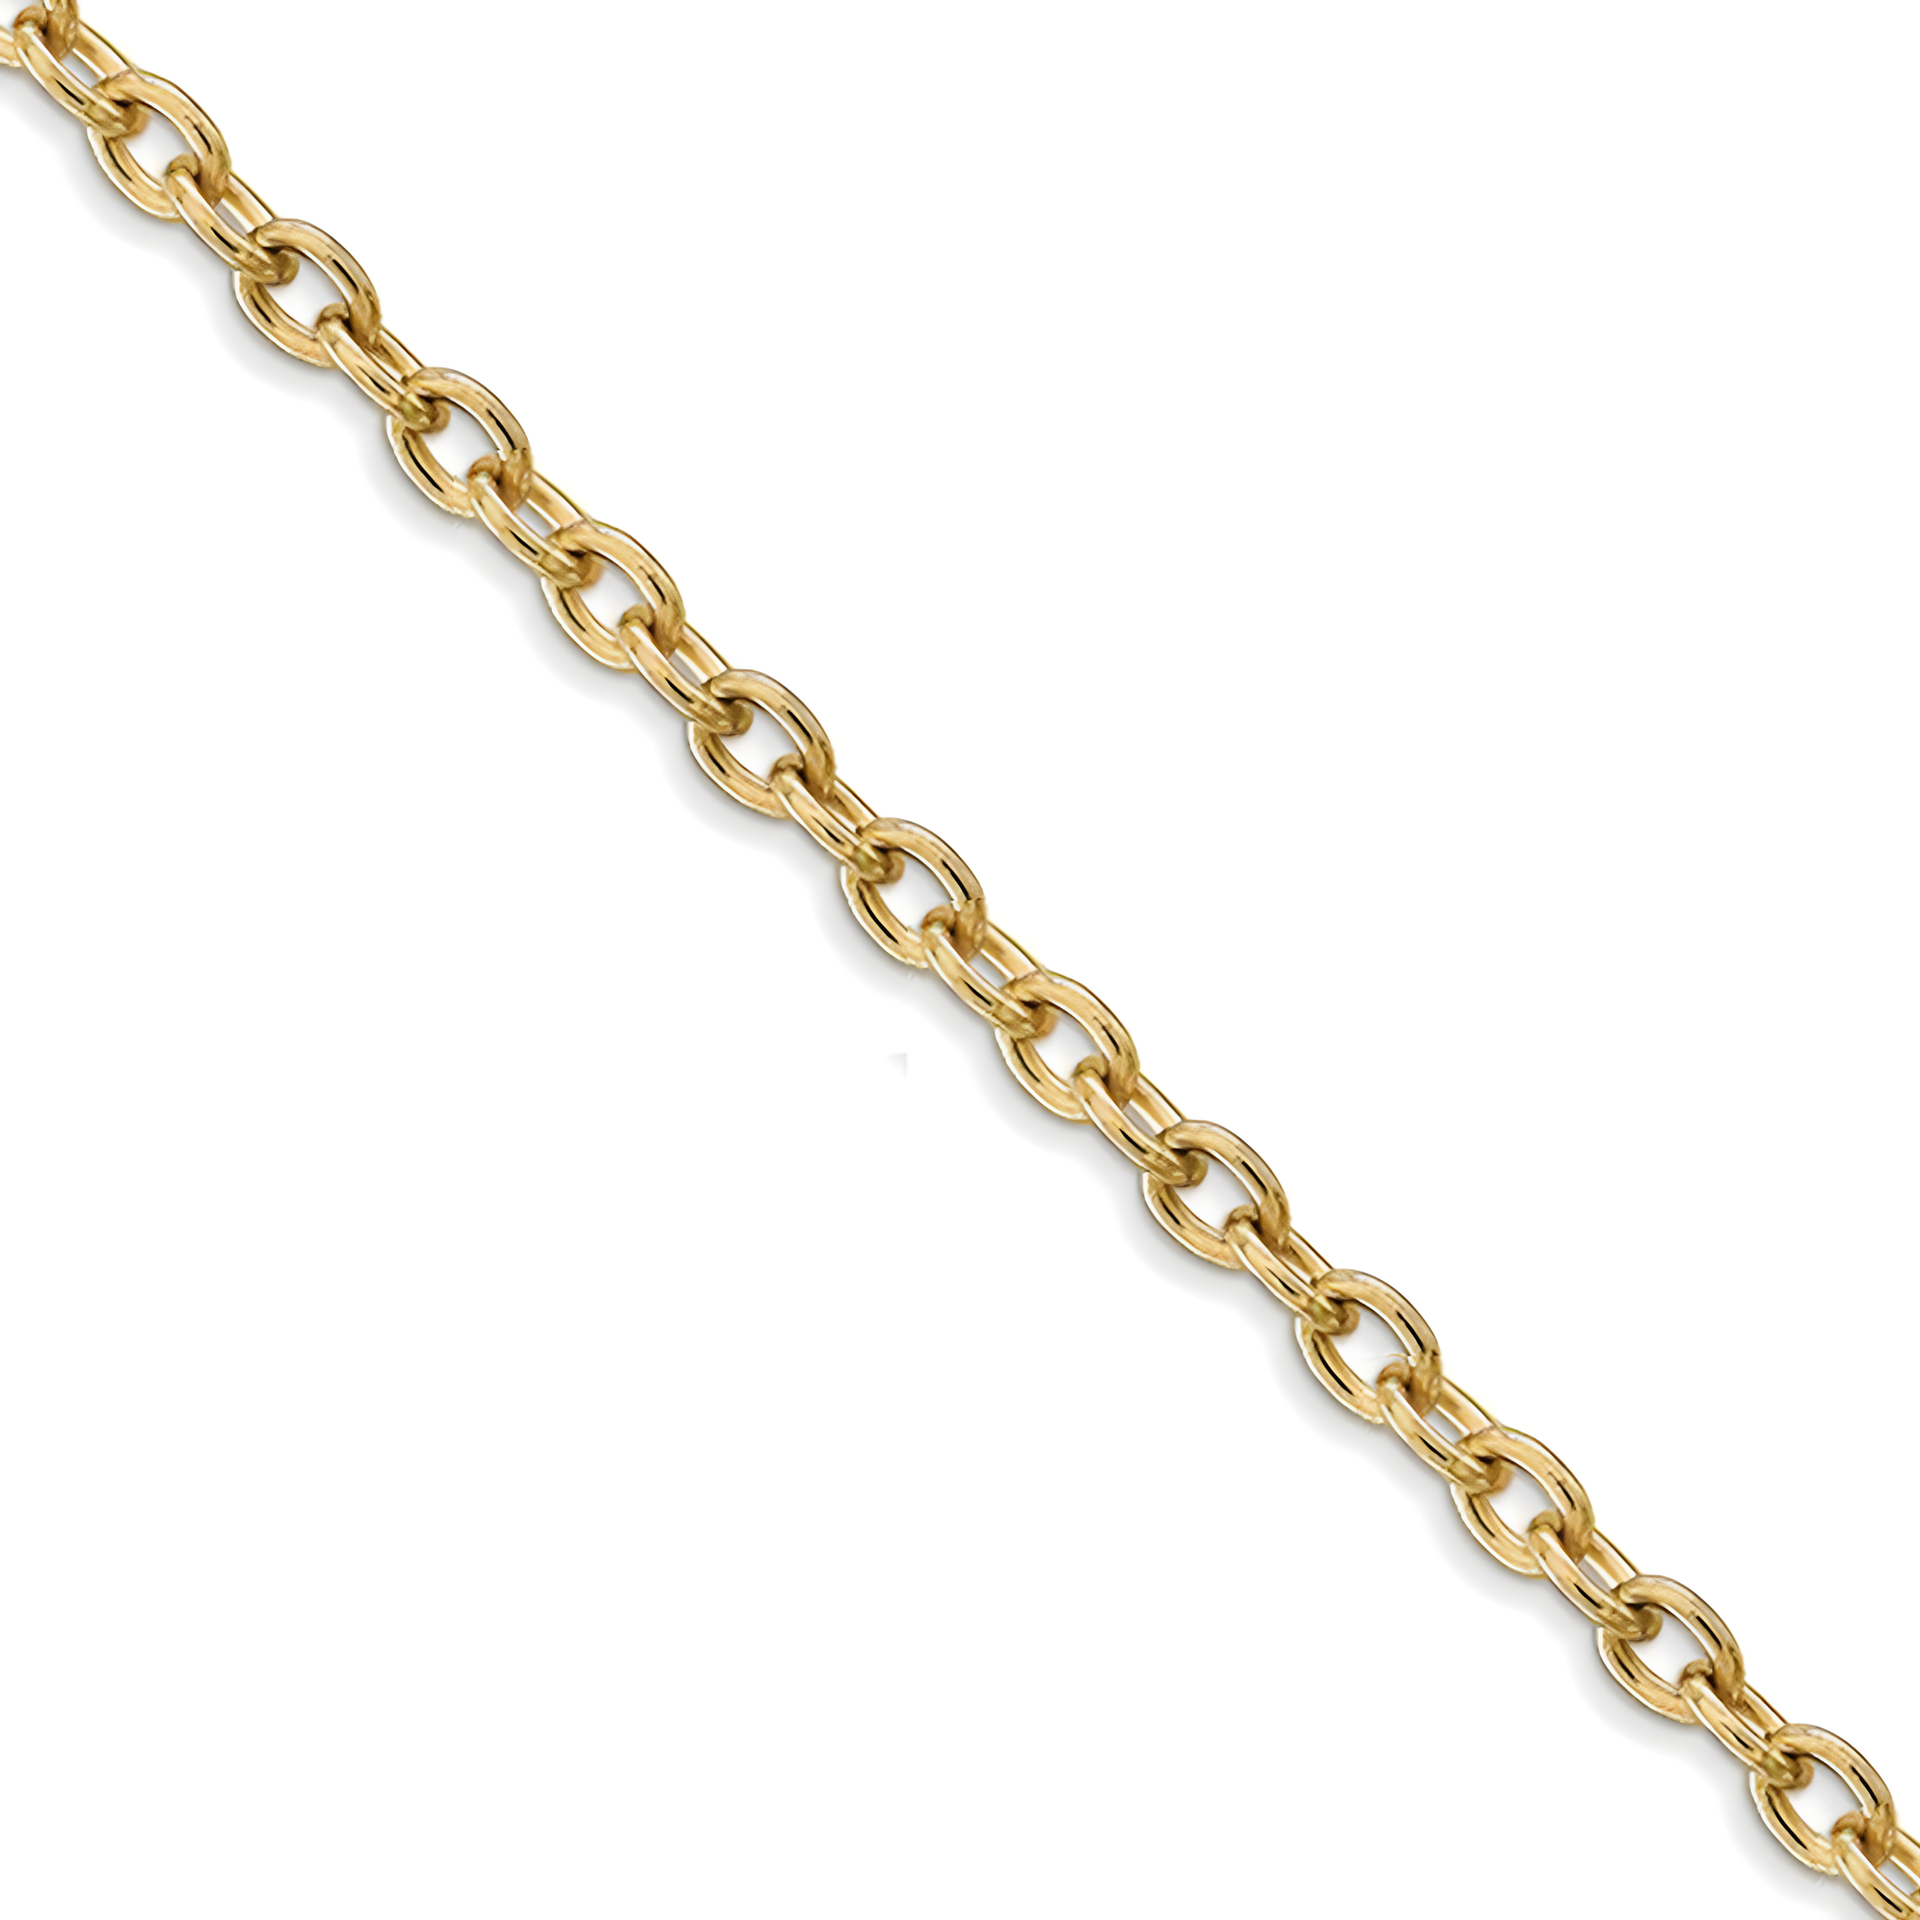 3.2mm Cable Chain - Gold Chain Necklace Open Link Design